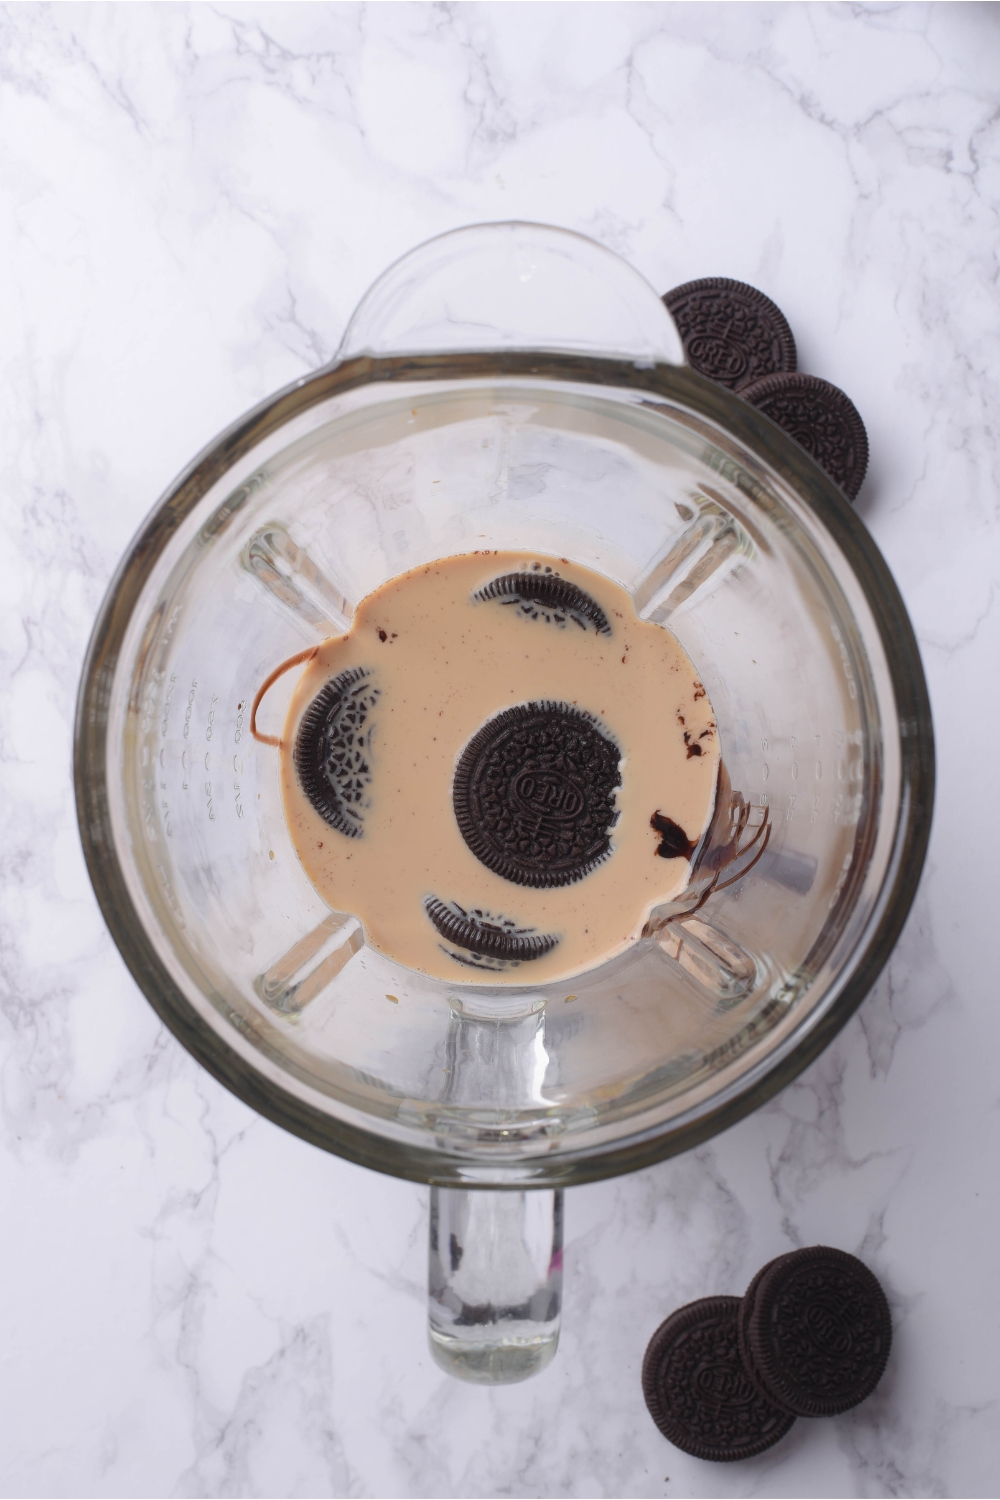 A blender with milk, oreo cookies, ice, and chocolate sauce in it.